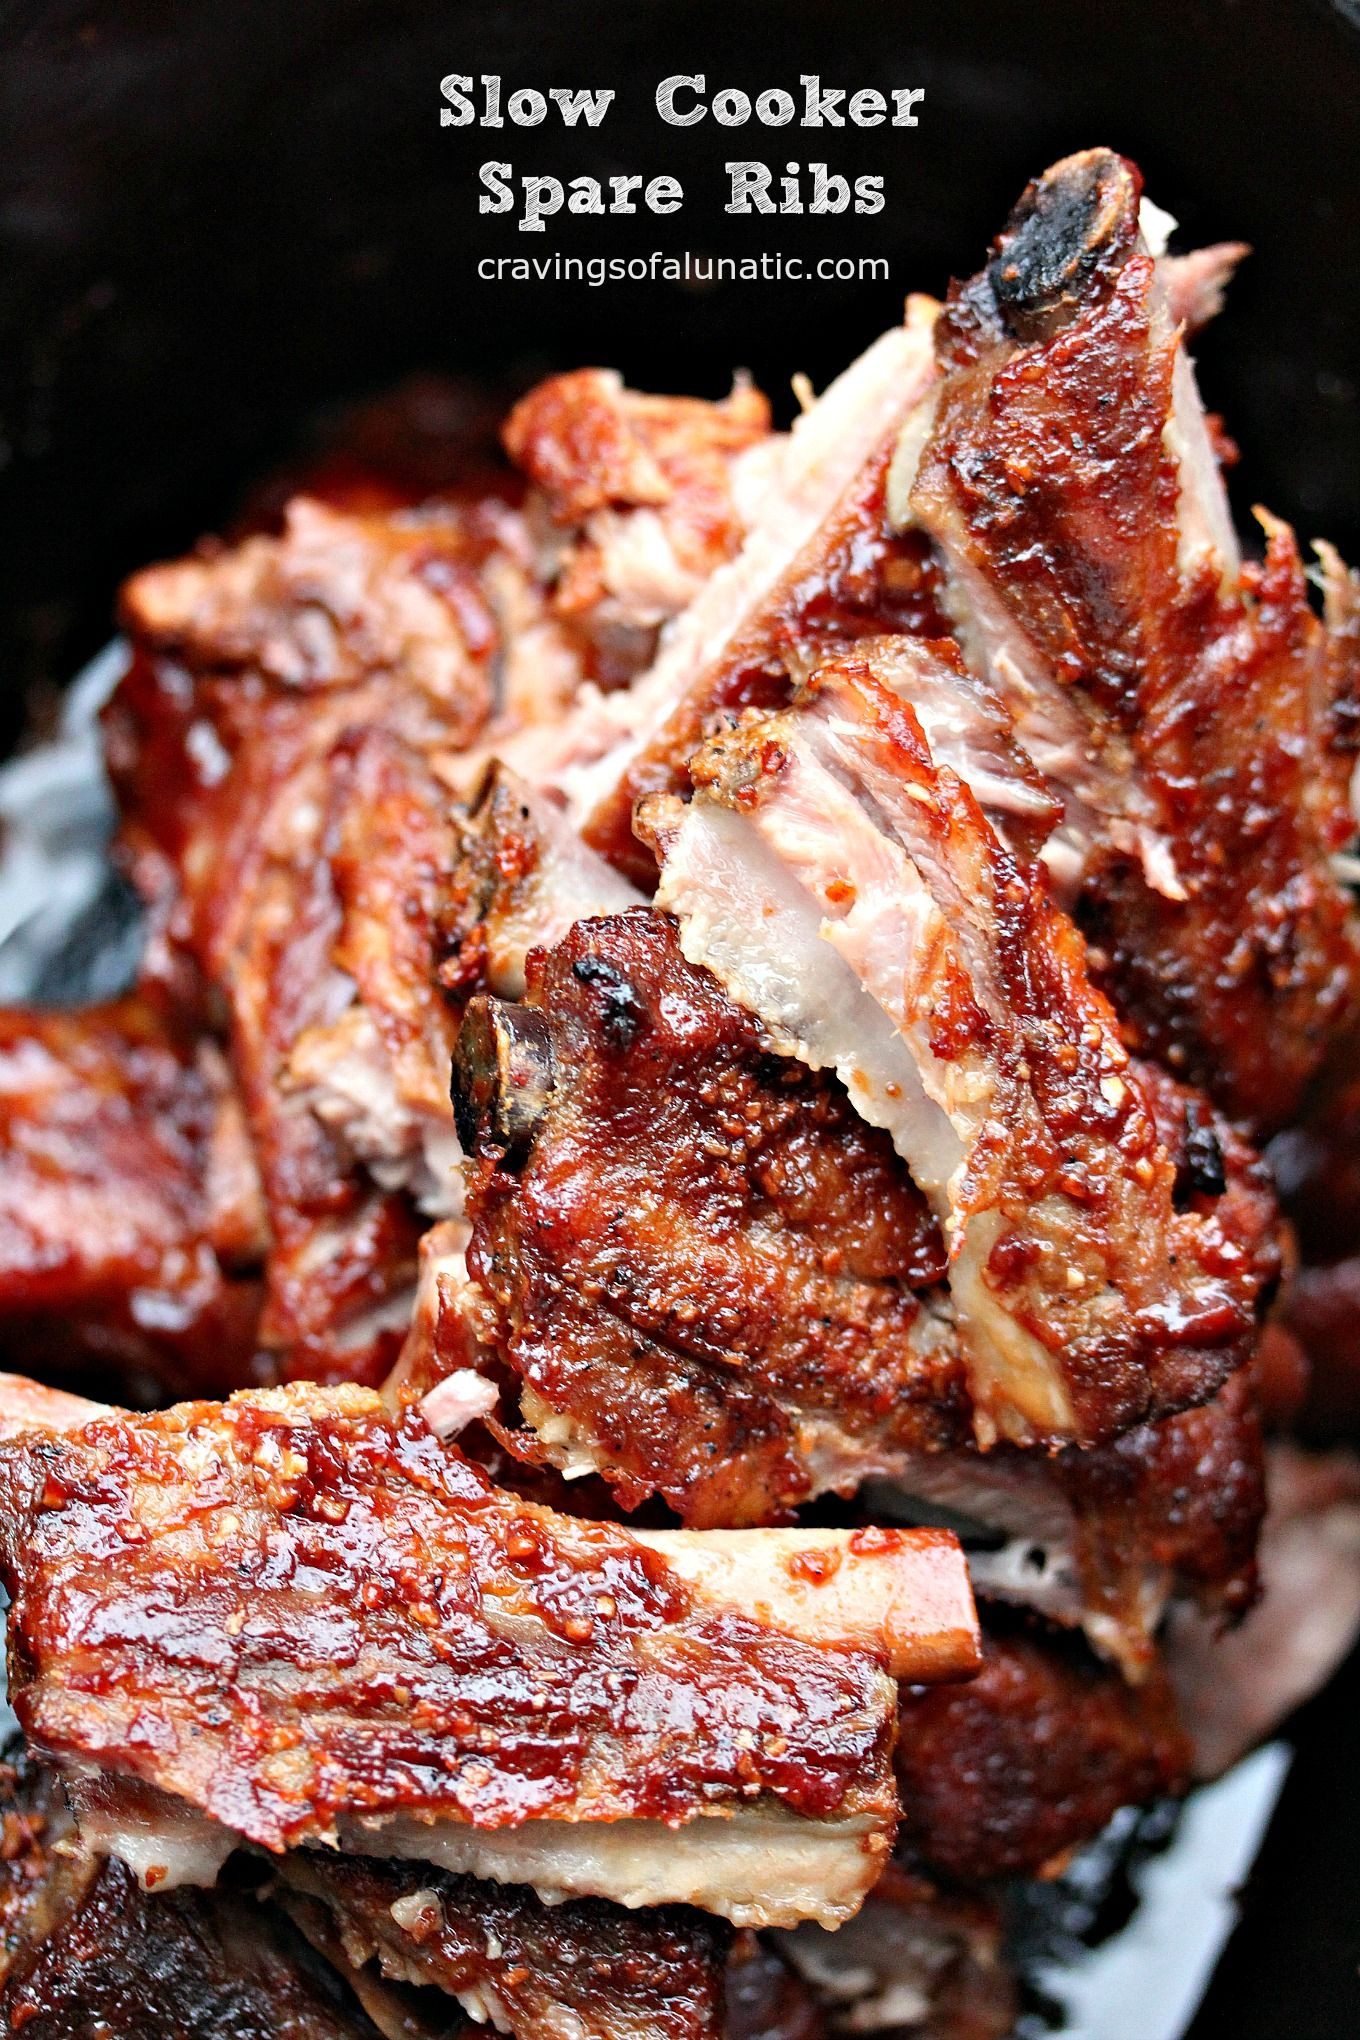 Pork Spare Ribs Slow Cooker Recipe
 Slow Cooker Spare Ribs from cravingsofalunatic This